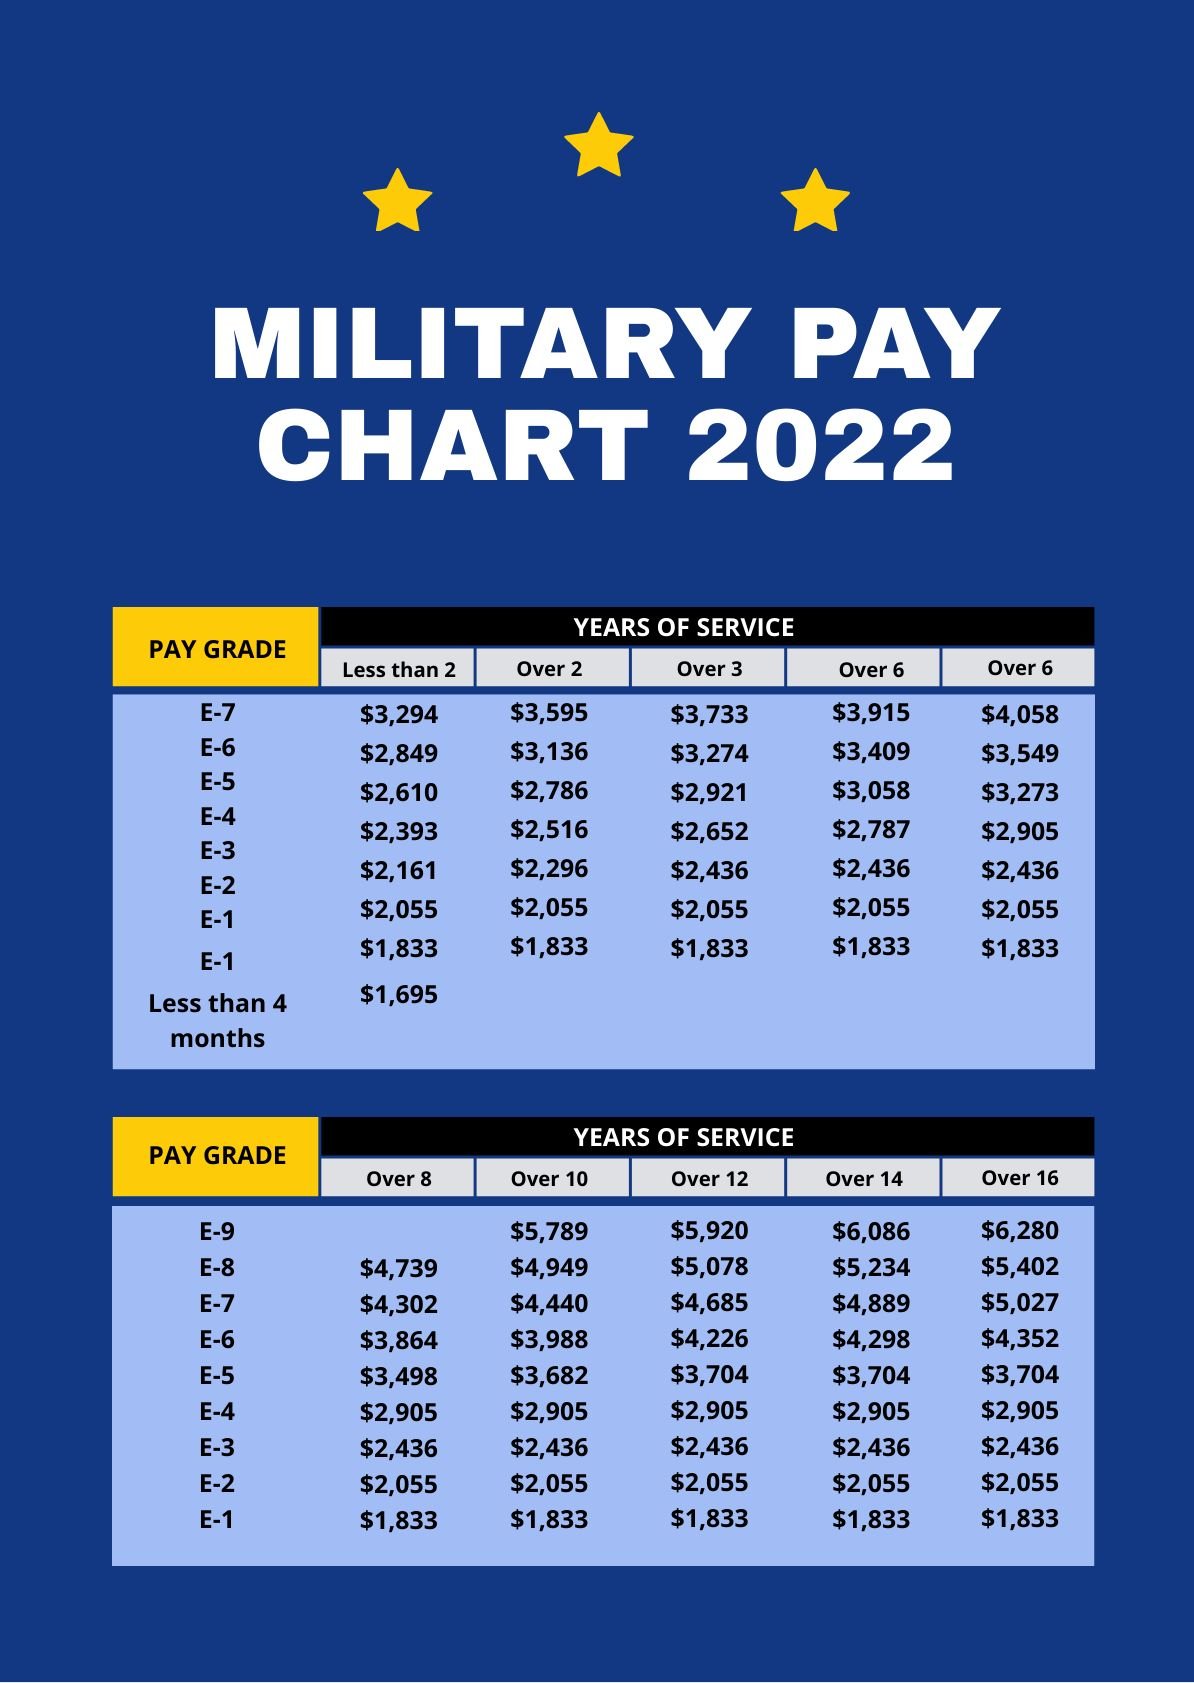 Free Military Pay Chart 2022 in PDF